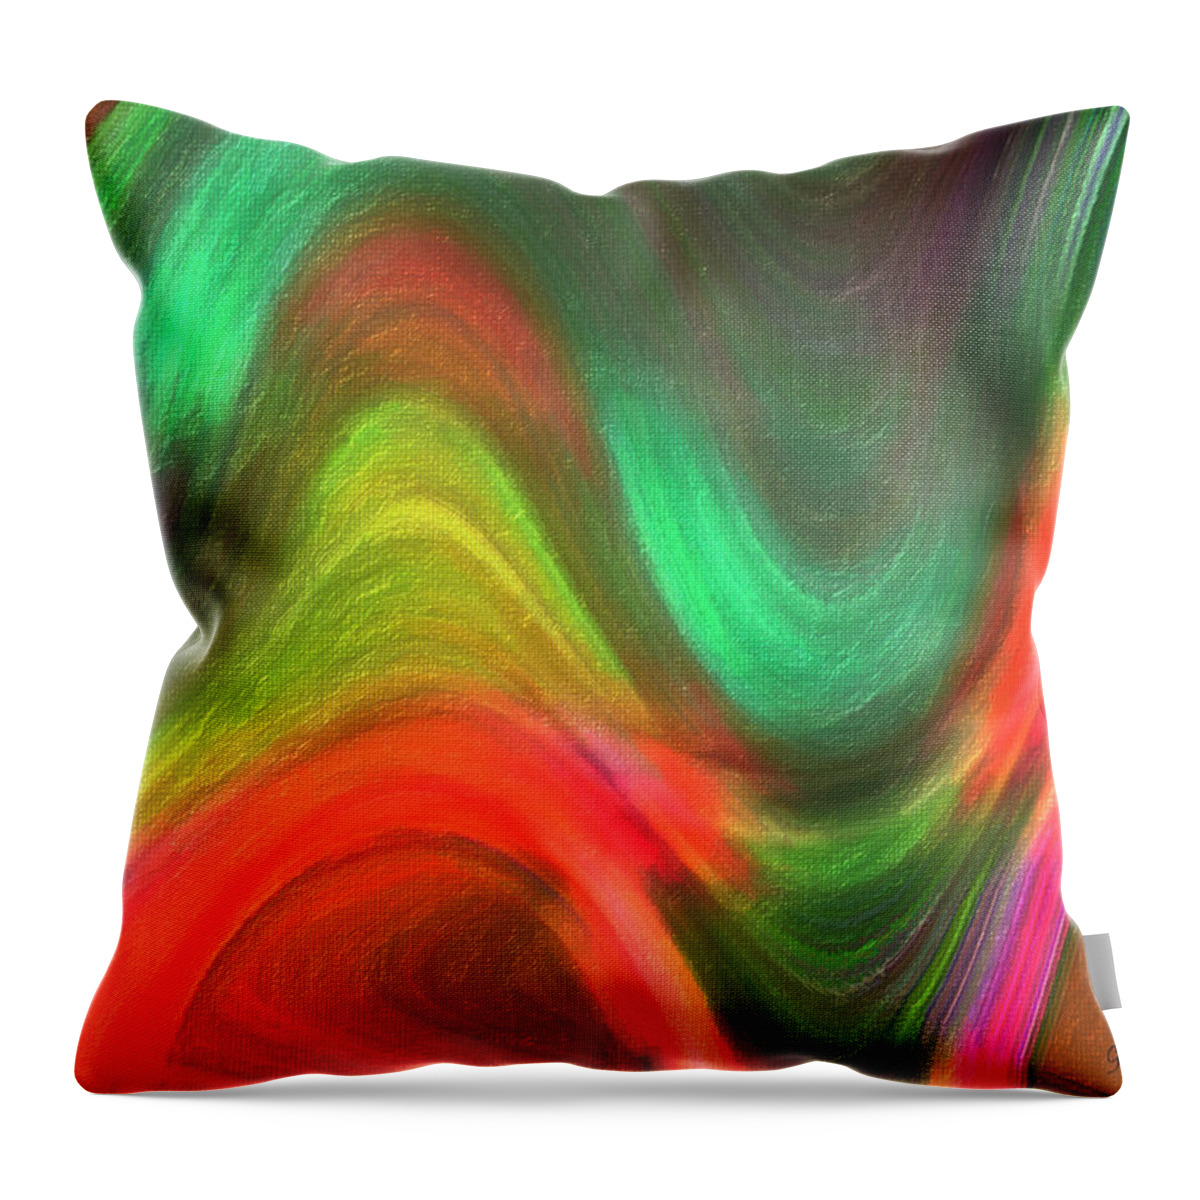 Abstract. Colorful Throw Pillow featuring the digital art Communication by Gerlinde Keating - Galleria GK Keating Associates Inc